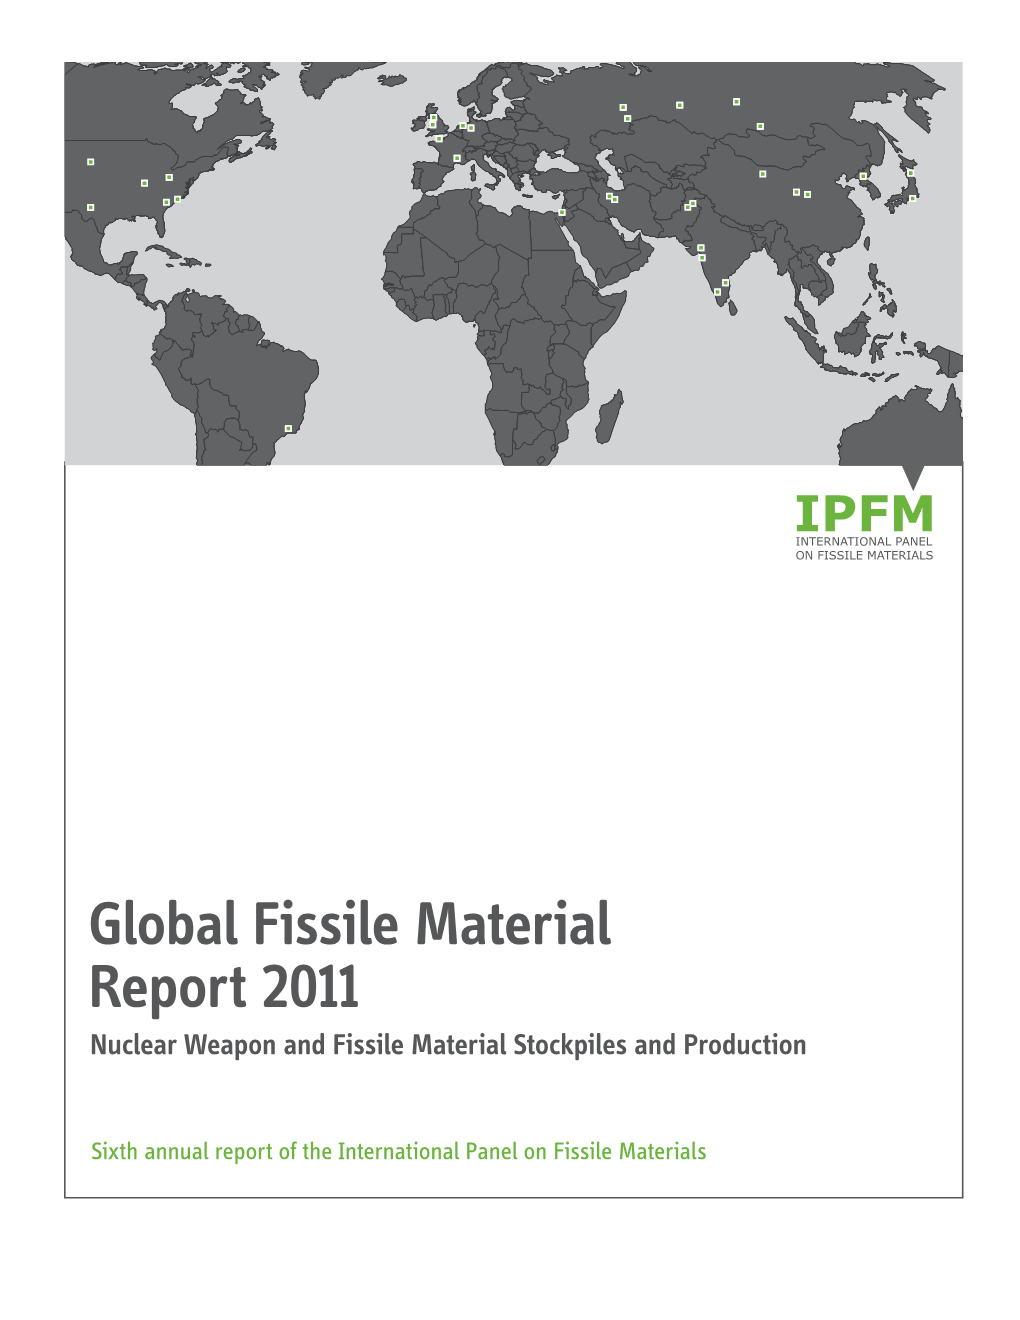 Global Fissile Material Report 2011 Nuclear Weapon and Fissile Material Stockpiles and Production